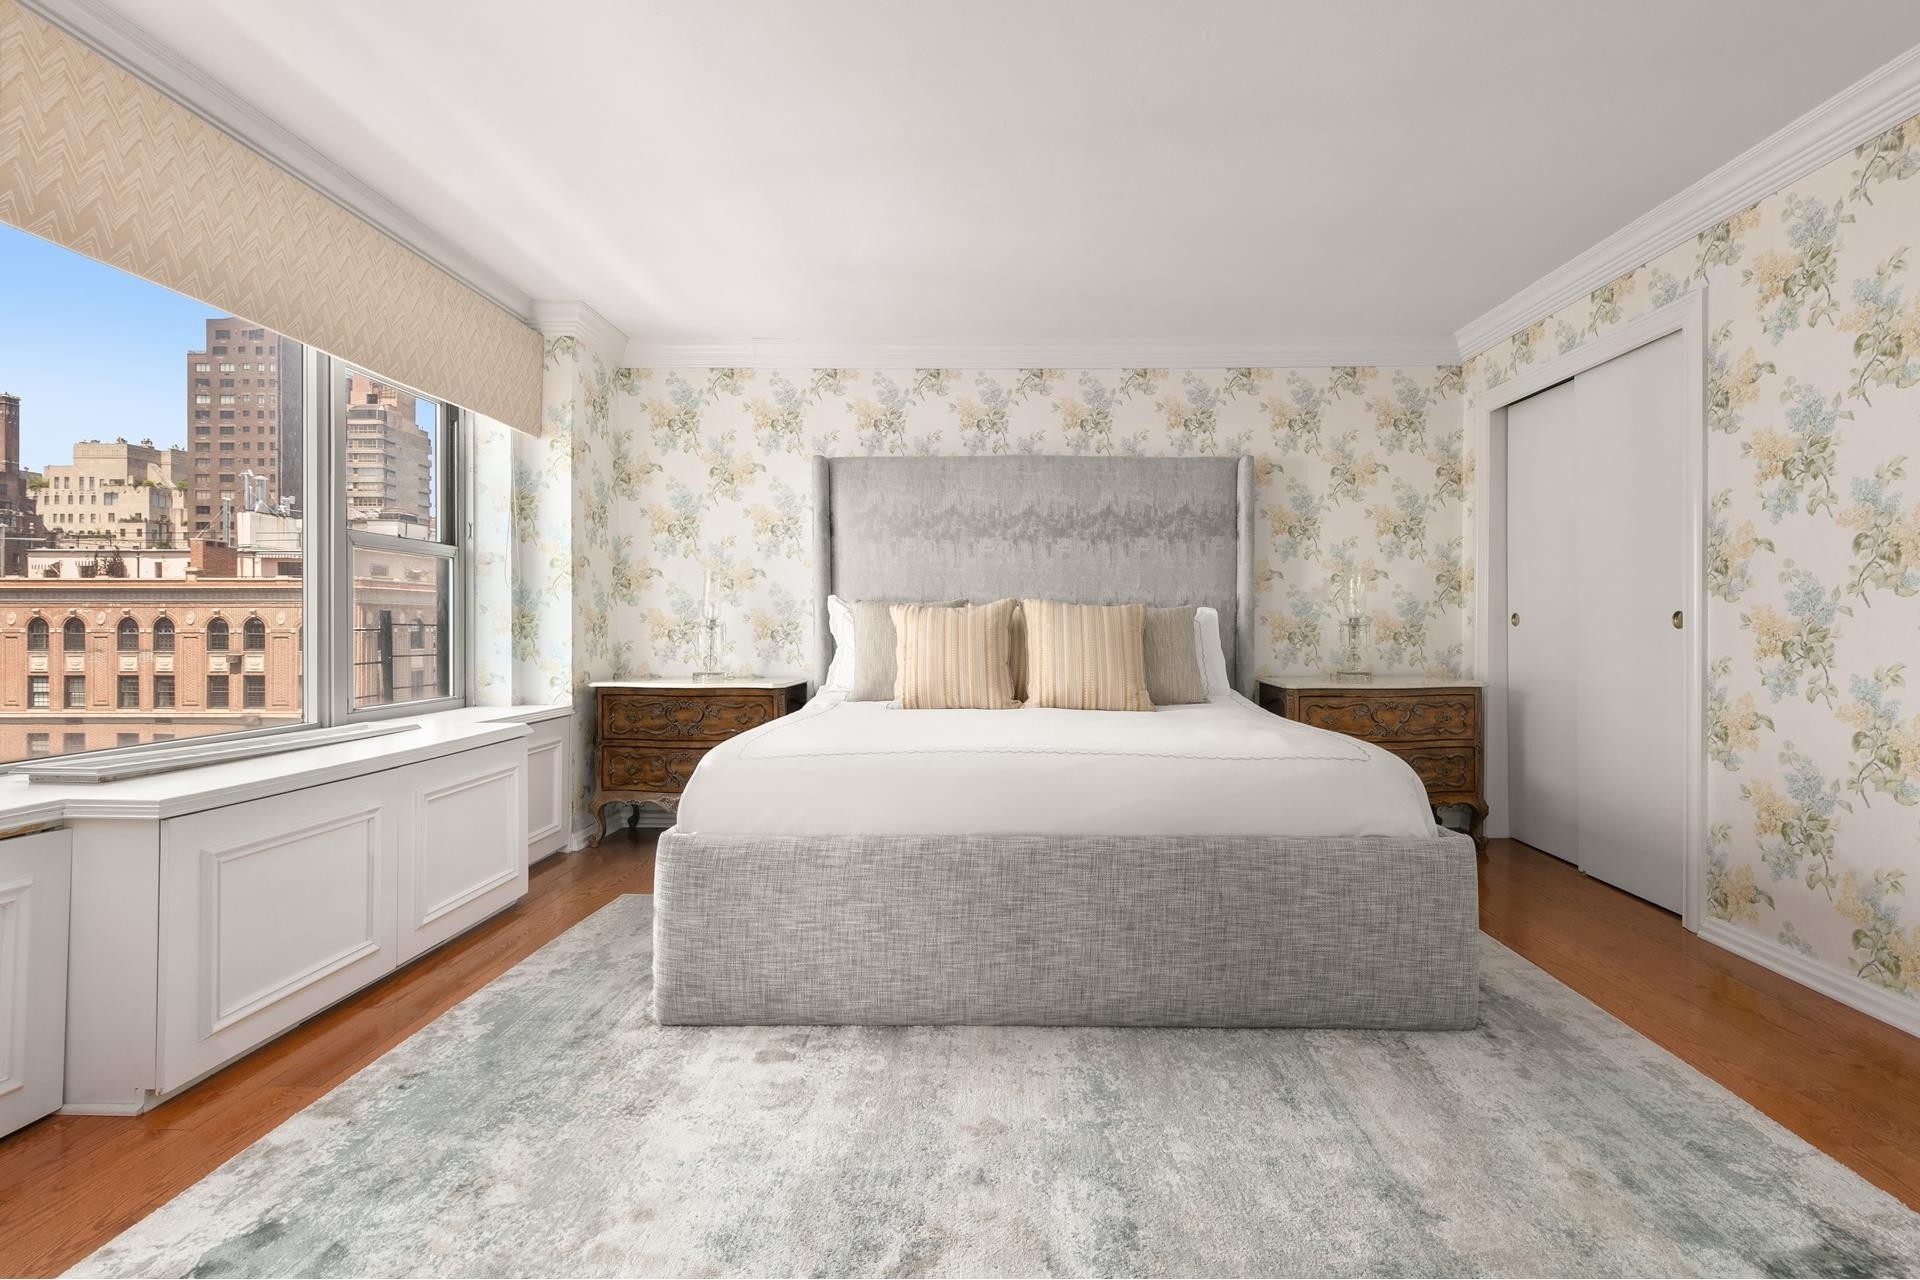 7. Co-op Properties for Sale at Imperial House, 150 E 69TH ST, 12CD Lenox Hill, New York, New York 10021